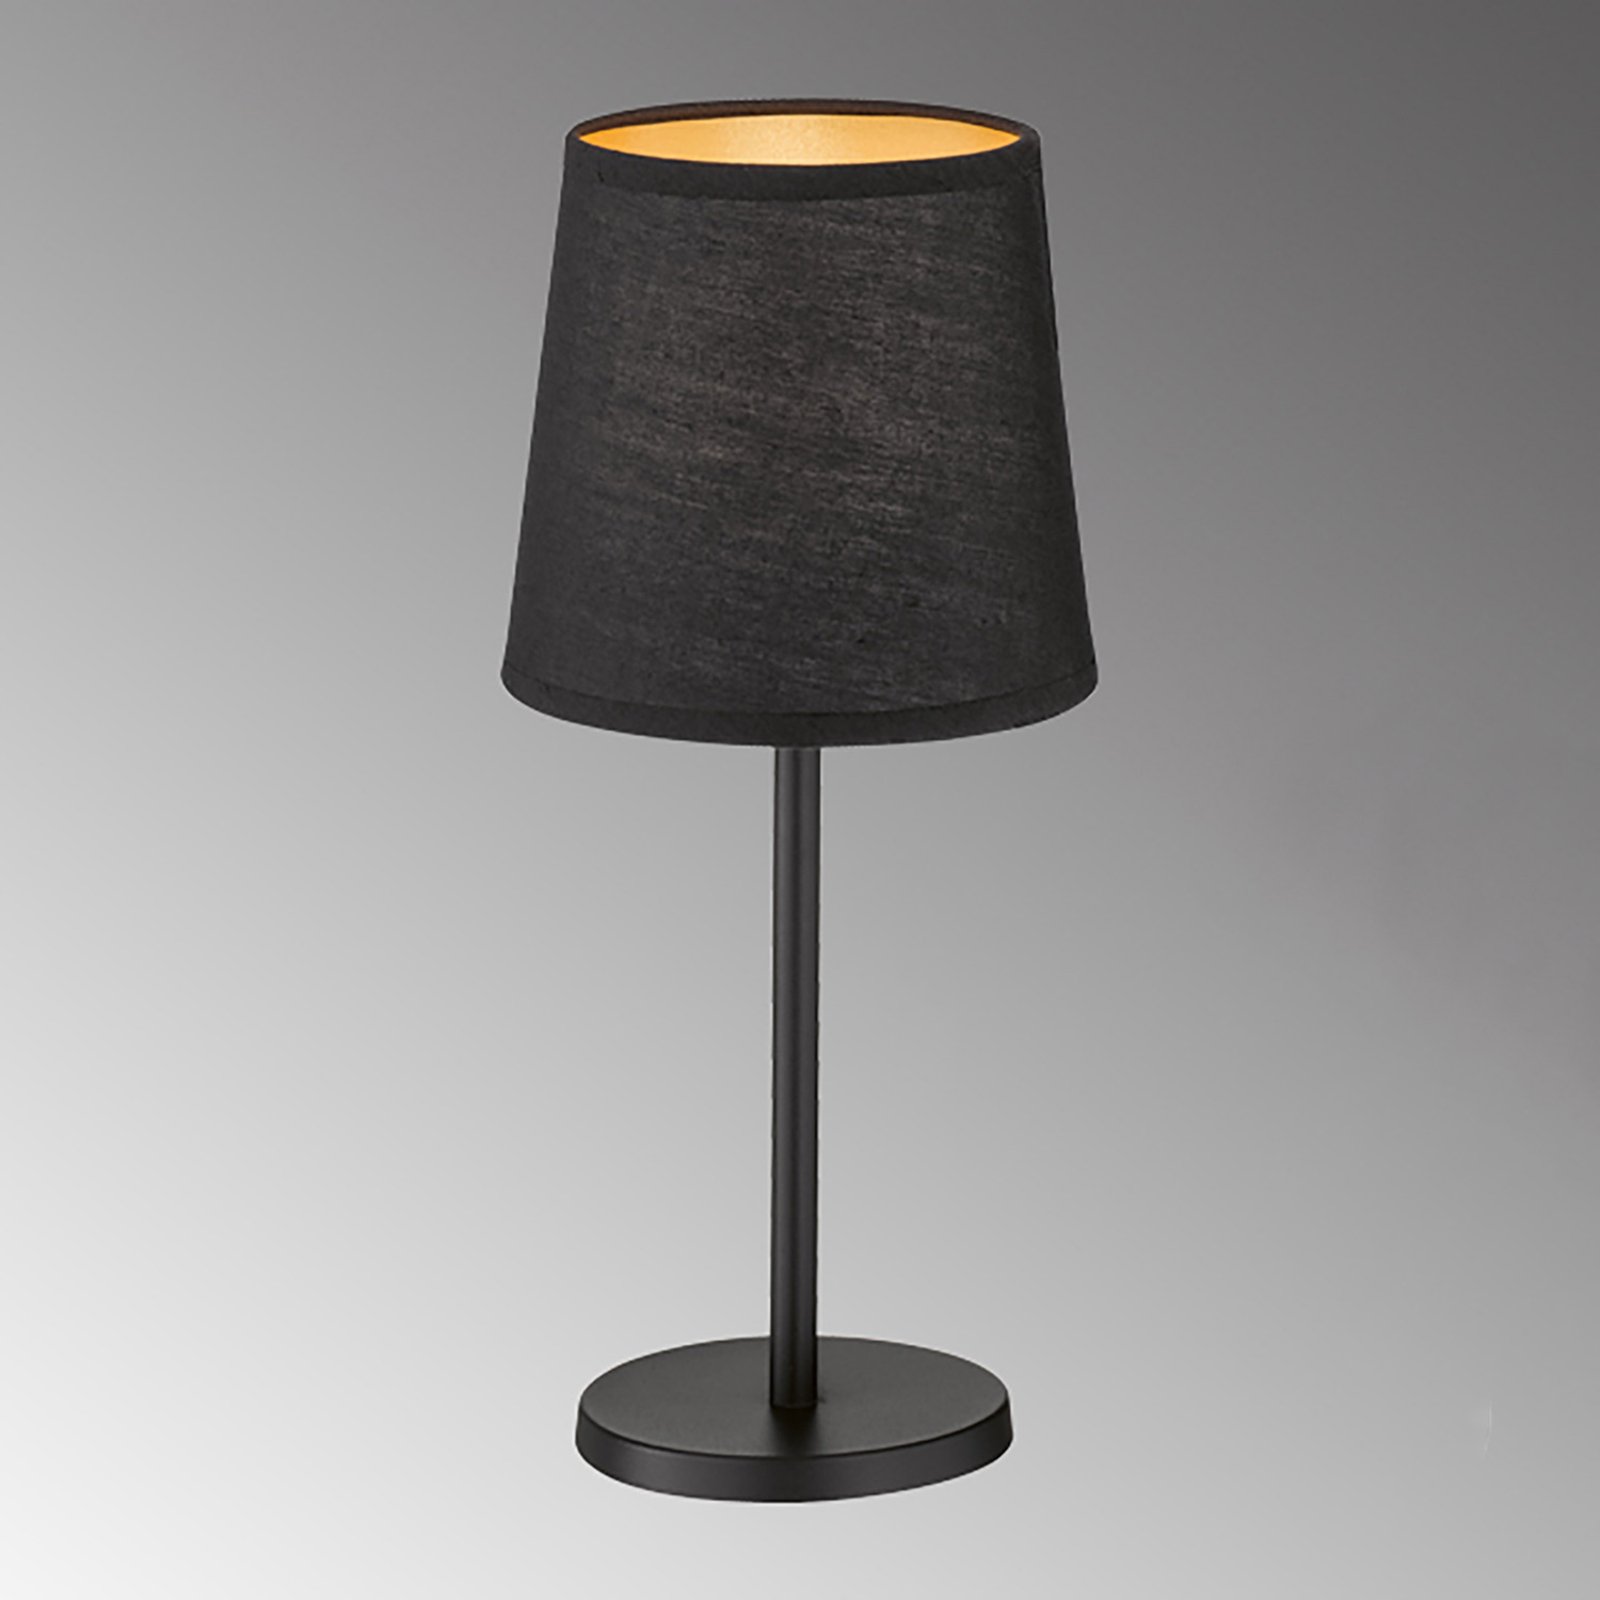 Eve table lamp, fabric lampshade, black/gold